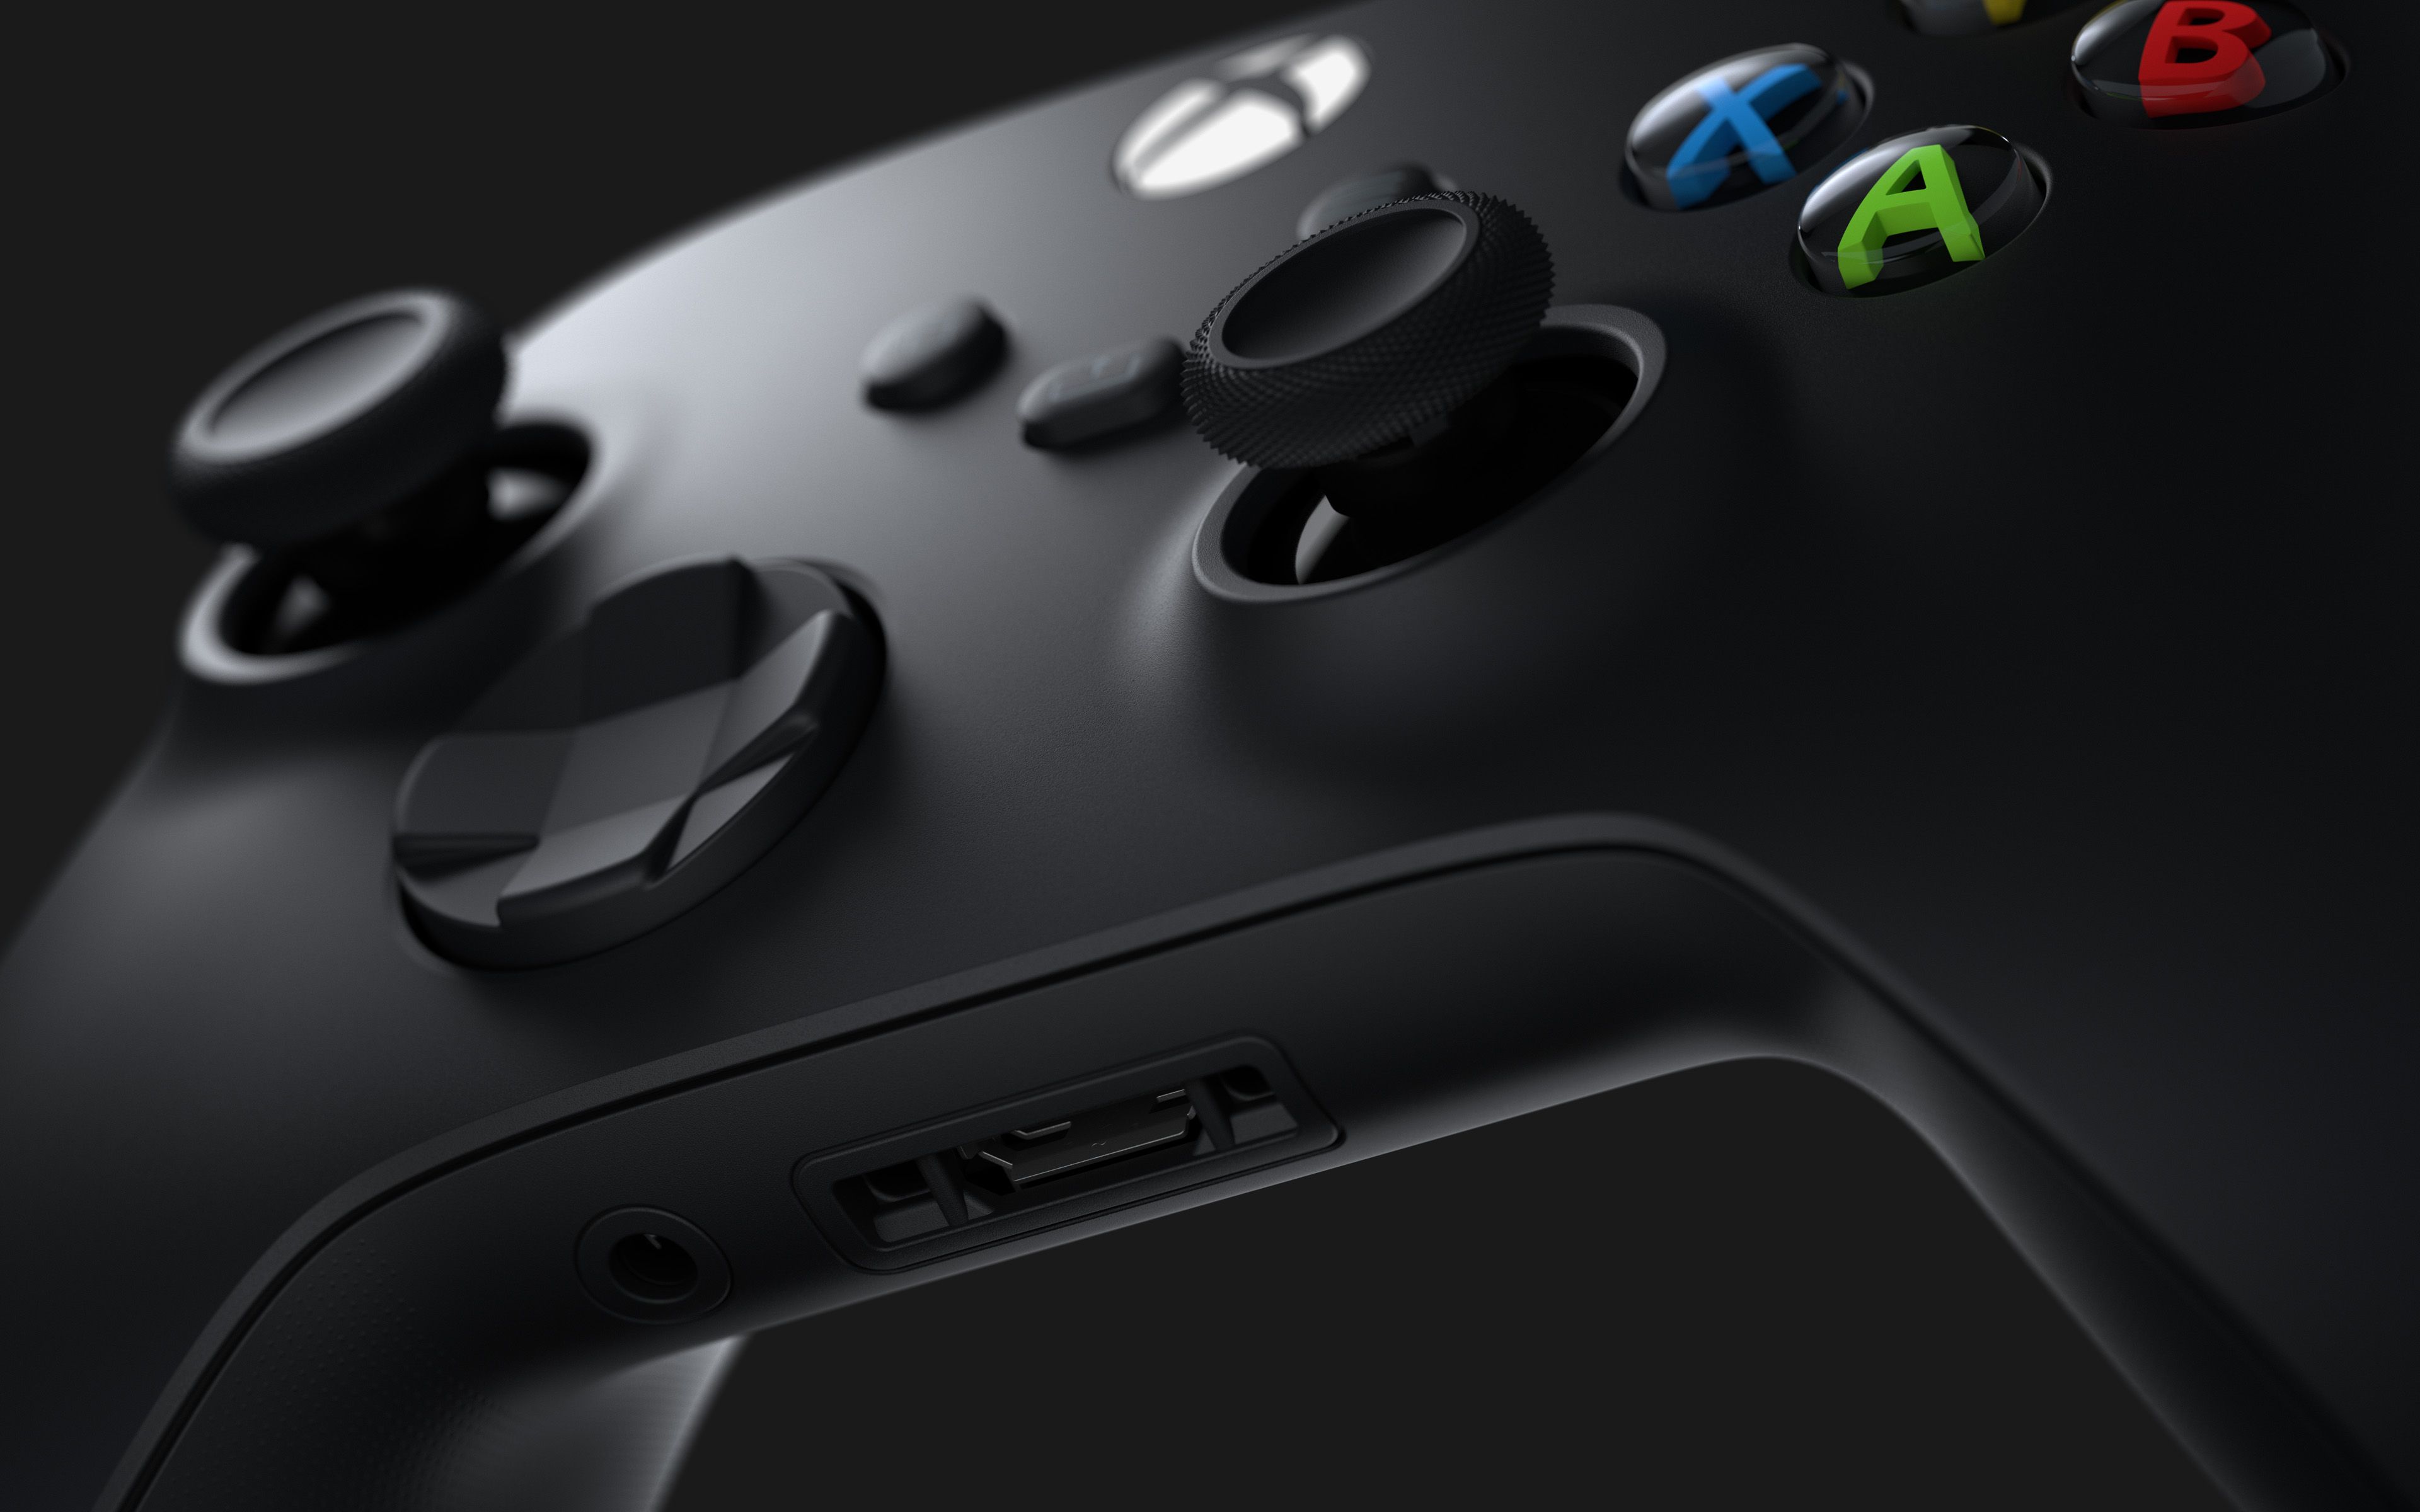 Download wallpaper Xbox Series X, game joystick, Scuf Prestige Tungsten Gray, Xbox One, Xbox One controllers, Xbox for desktop with resolution 3840x2400. High Quality HD picture wallpaper